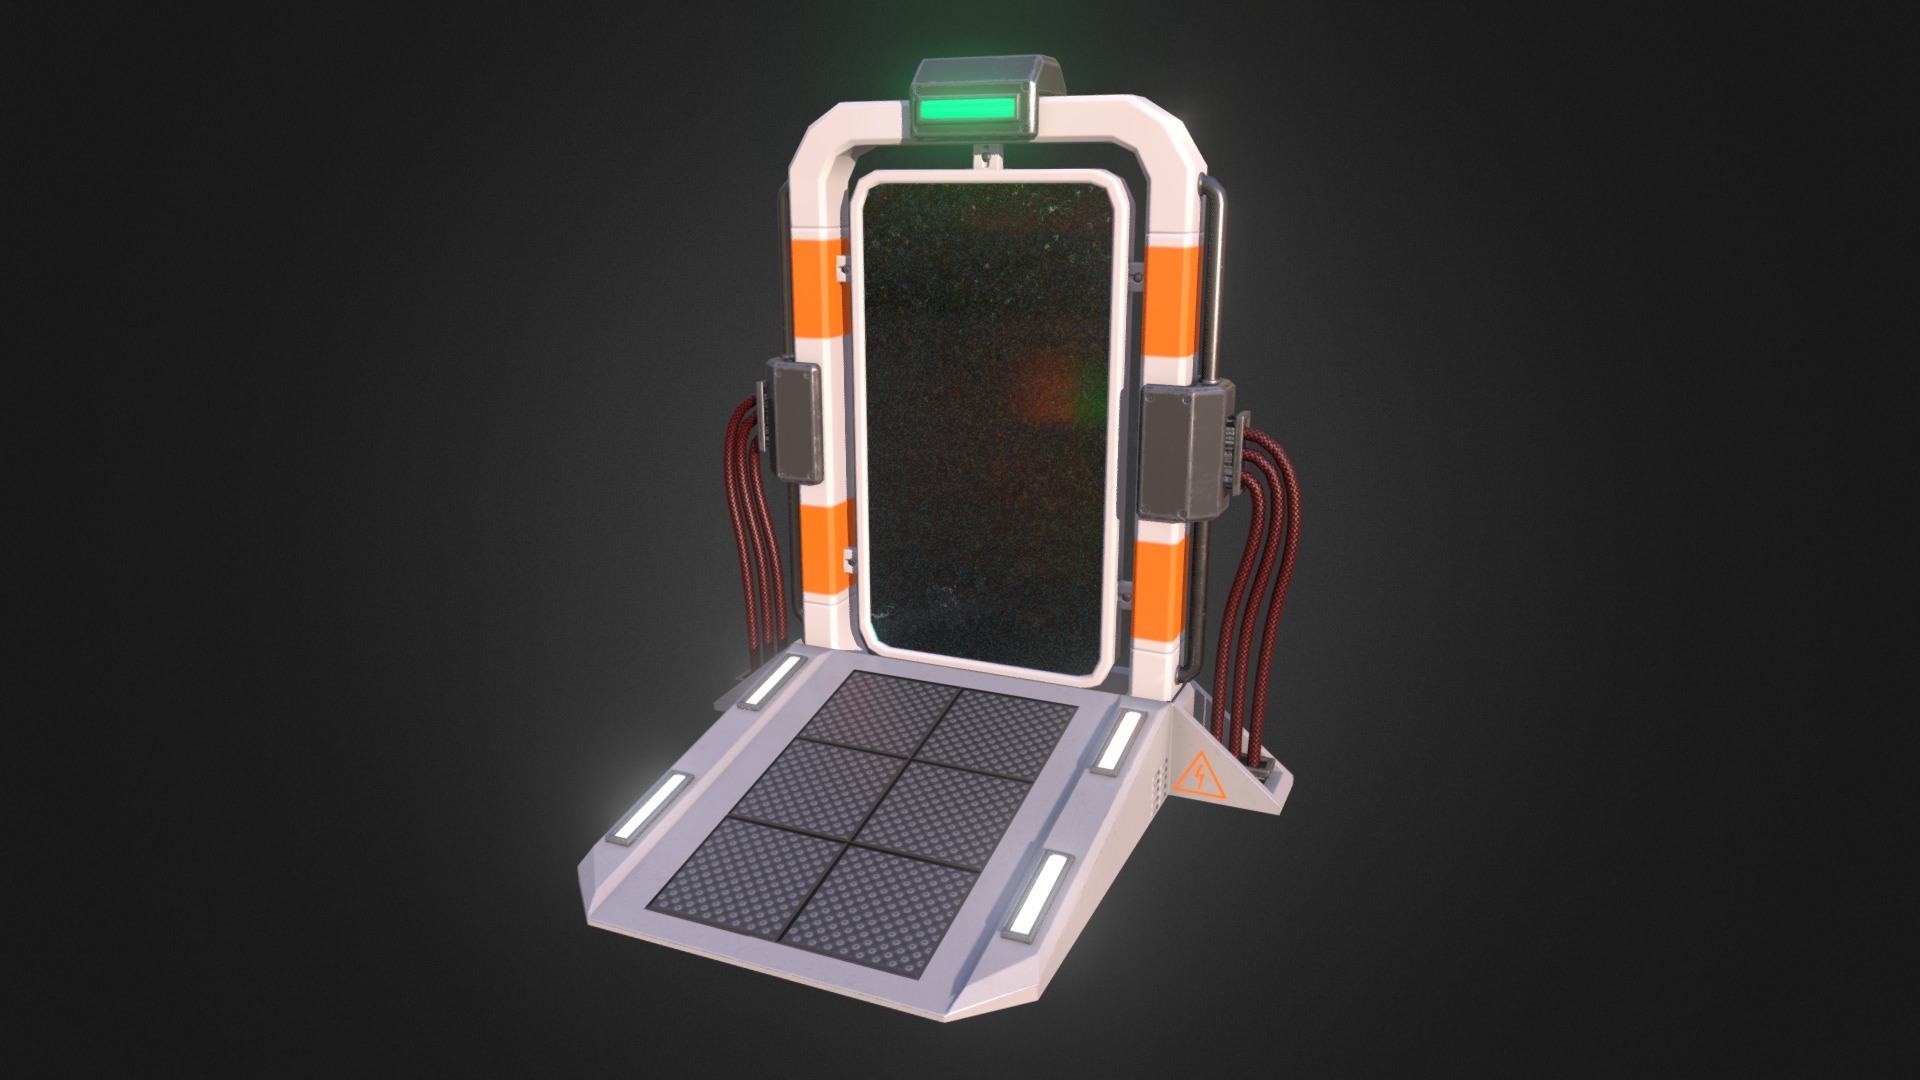 A scifi portal/teleportation gate made for VR Sea Legs by 3lbgames! Made for Unity engine, modeled in Blender, textured in Substance Painter 3d model